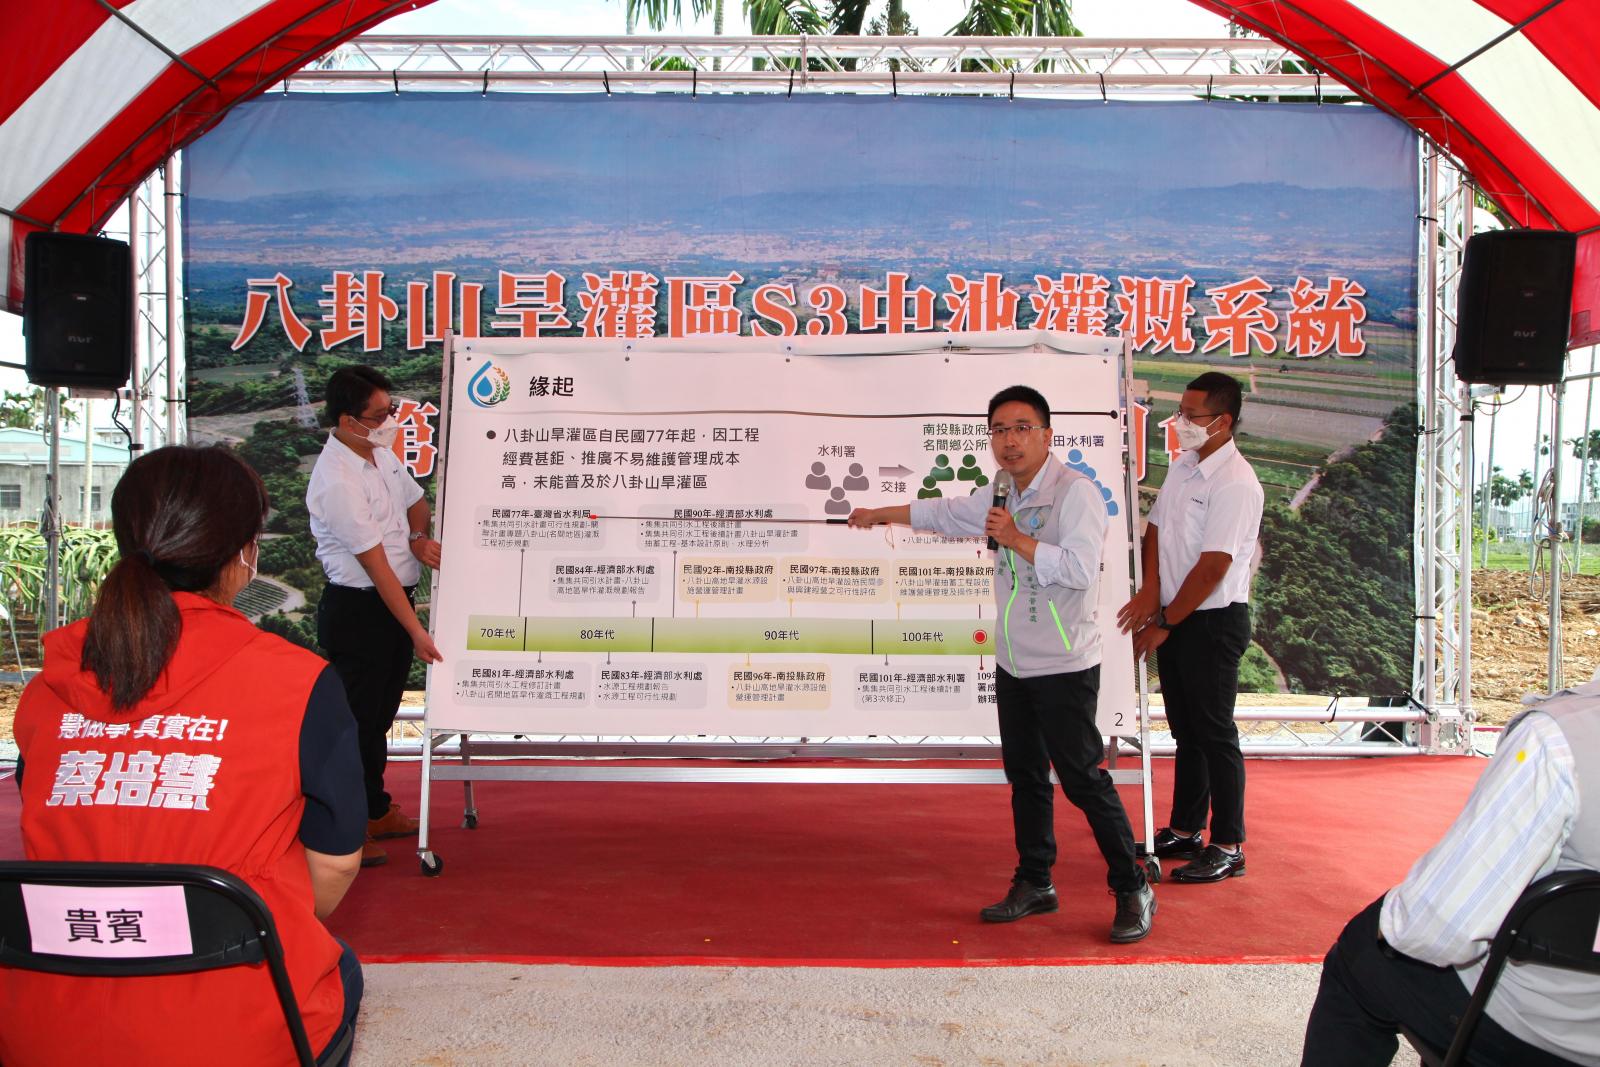 A briefing on the Second Phase of the S3 Zhongchi Irrigation System Improvement Plan for the Baguashan Area, held by the Changhua Management Office to expand irrigation services and more effectively utilize water resources